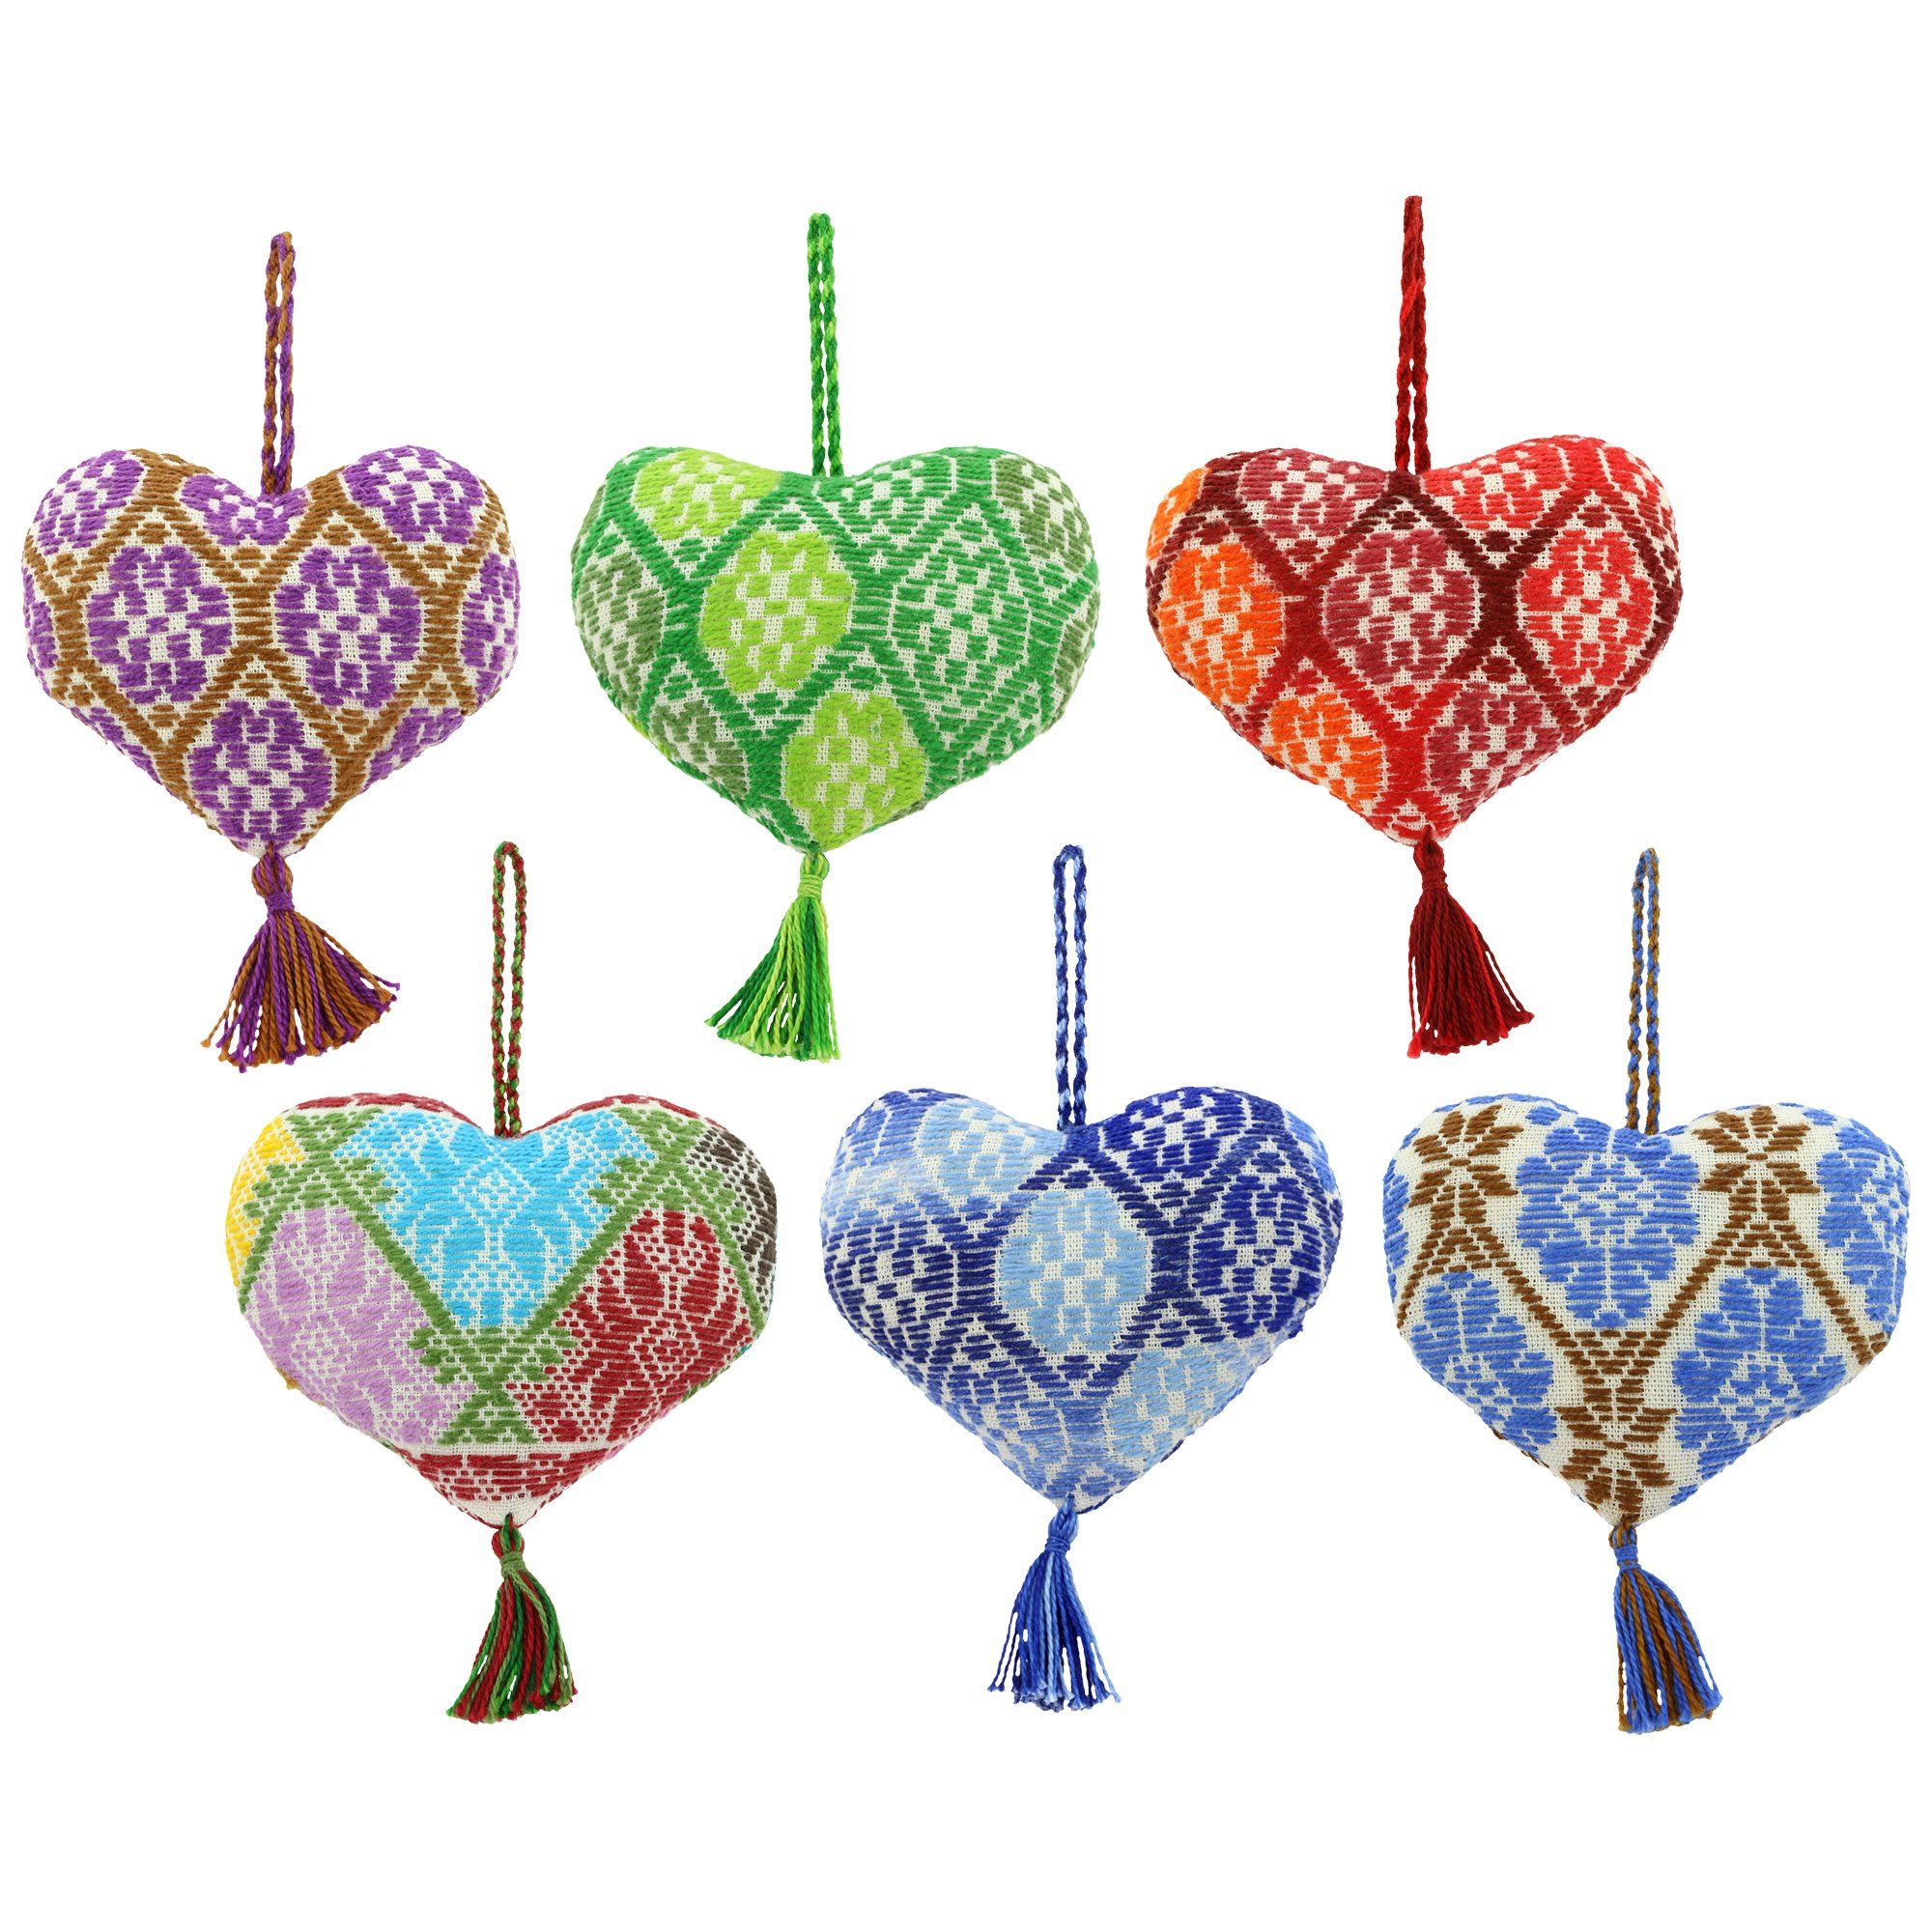 Hand-Embroidered Heart Ornament - Blue - Single